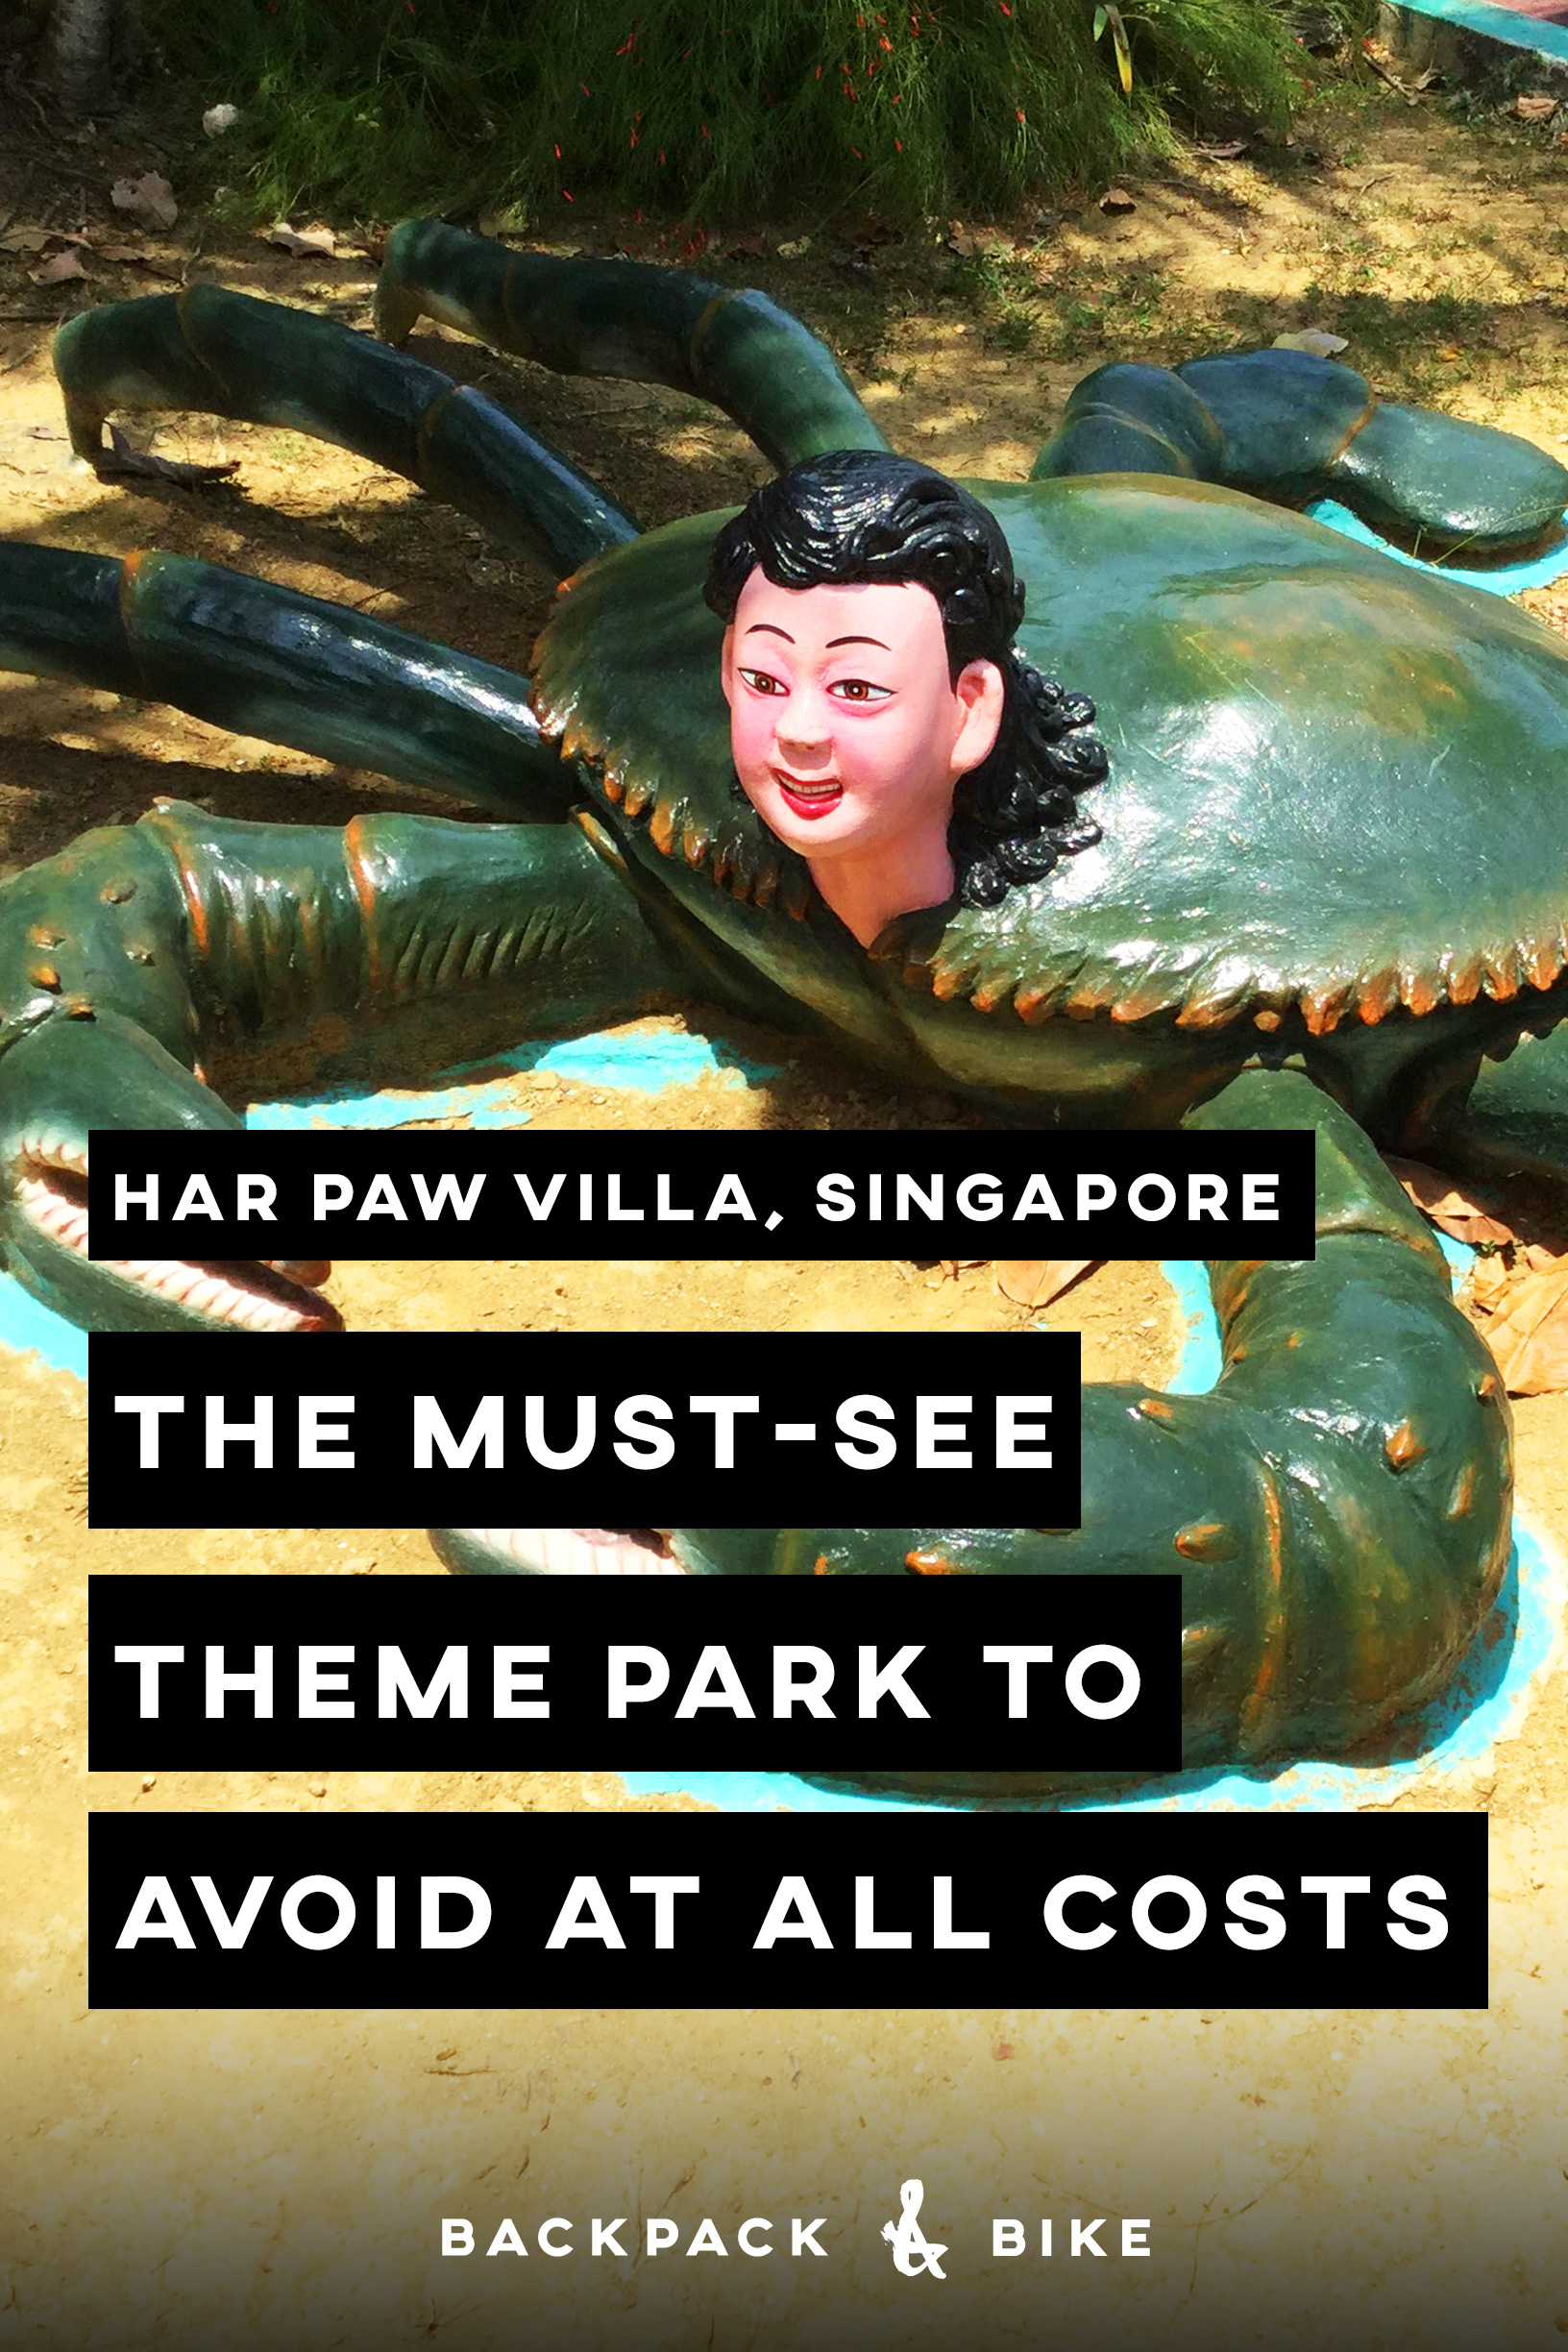 Today's trip to Har Paw Villa in Singapore made no sense. This bizarre post-apocalyptic abandoned theme park had a very strange flavour about it. Perhaps these images will help you understand.